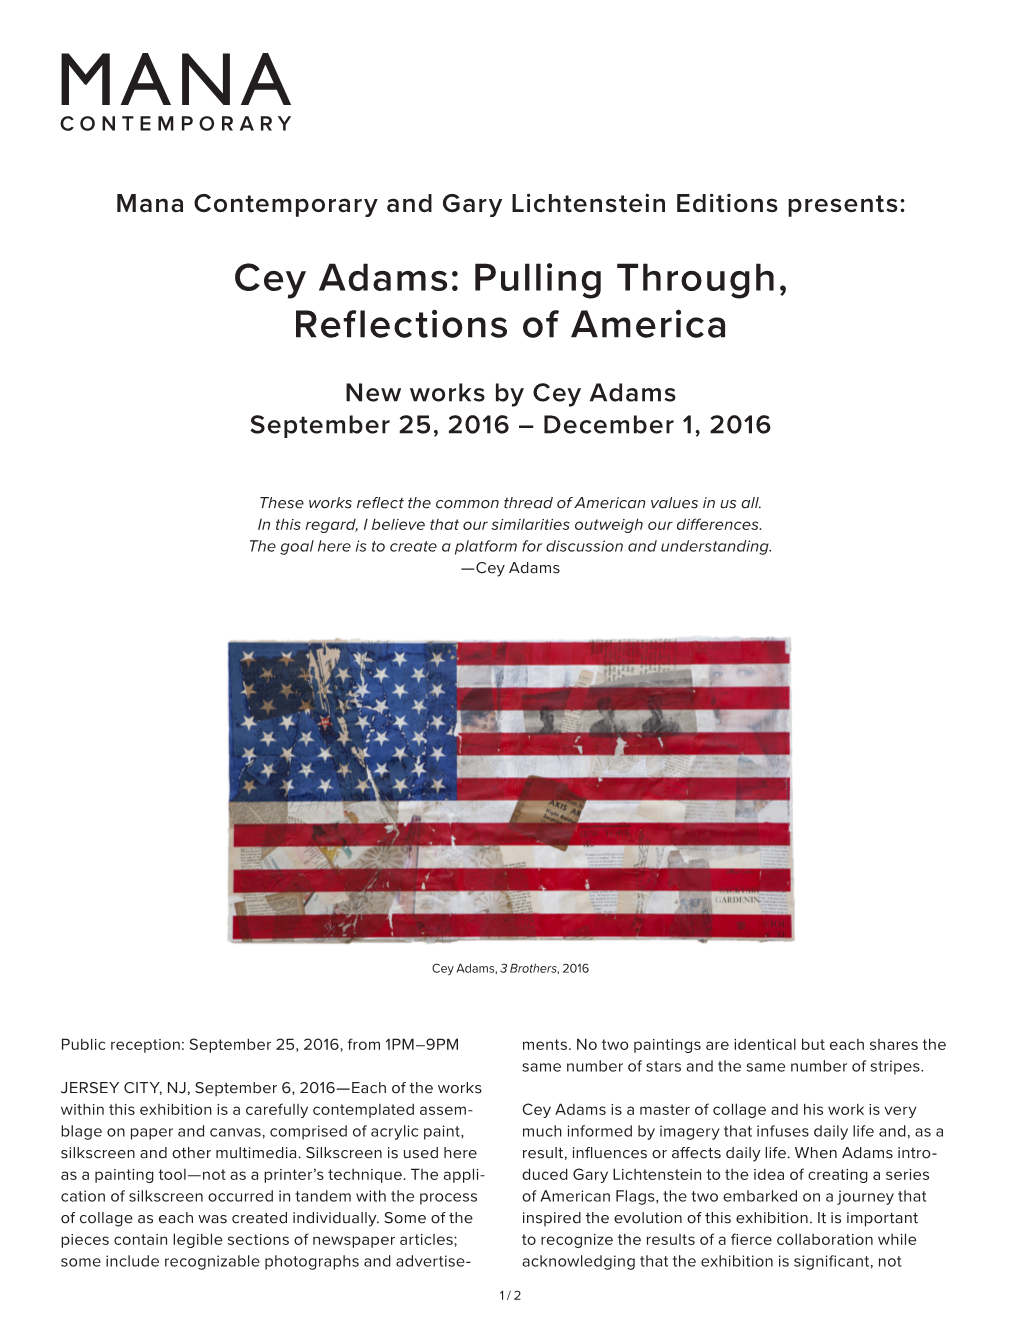 Cey Adams: Pulling Through, Reflections of America